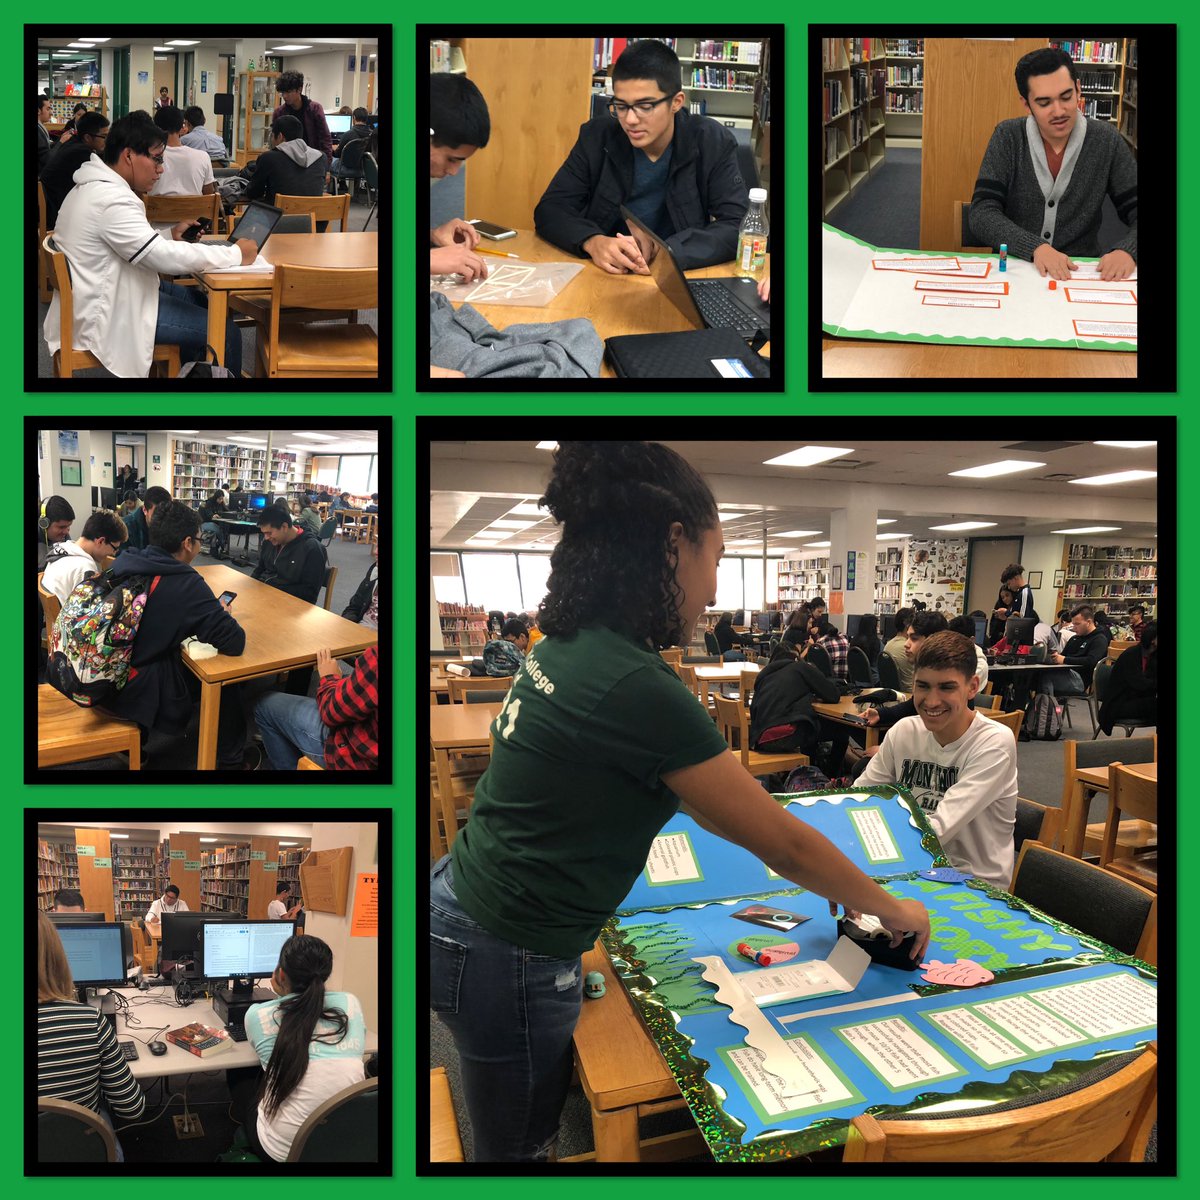 Just a typical lunch at the MHS library! #Team_SISD #SISD_READS #scienceprojects #research #STEM #databases #meetingplace #hangout #loveyourlibrary #heartoftheschool @DMacon_MHSReads @MontwoodHS @ARomo_MHS @Sparks_Interest